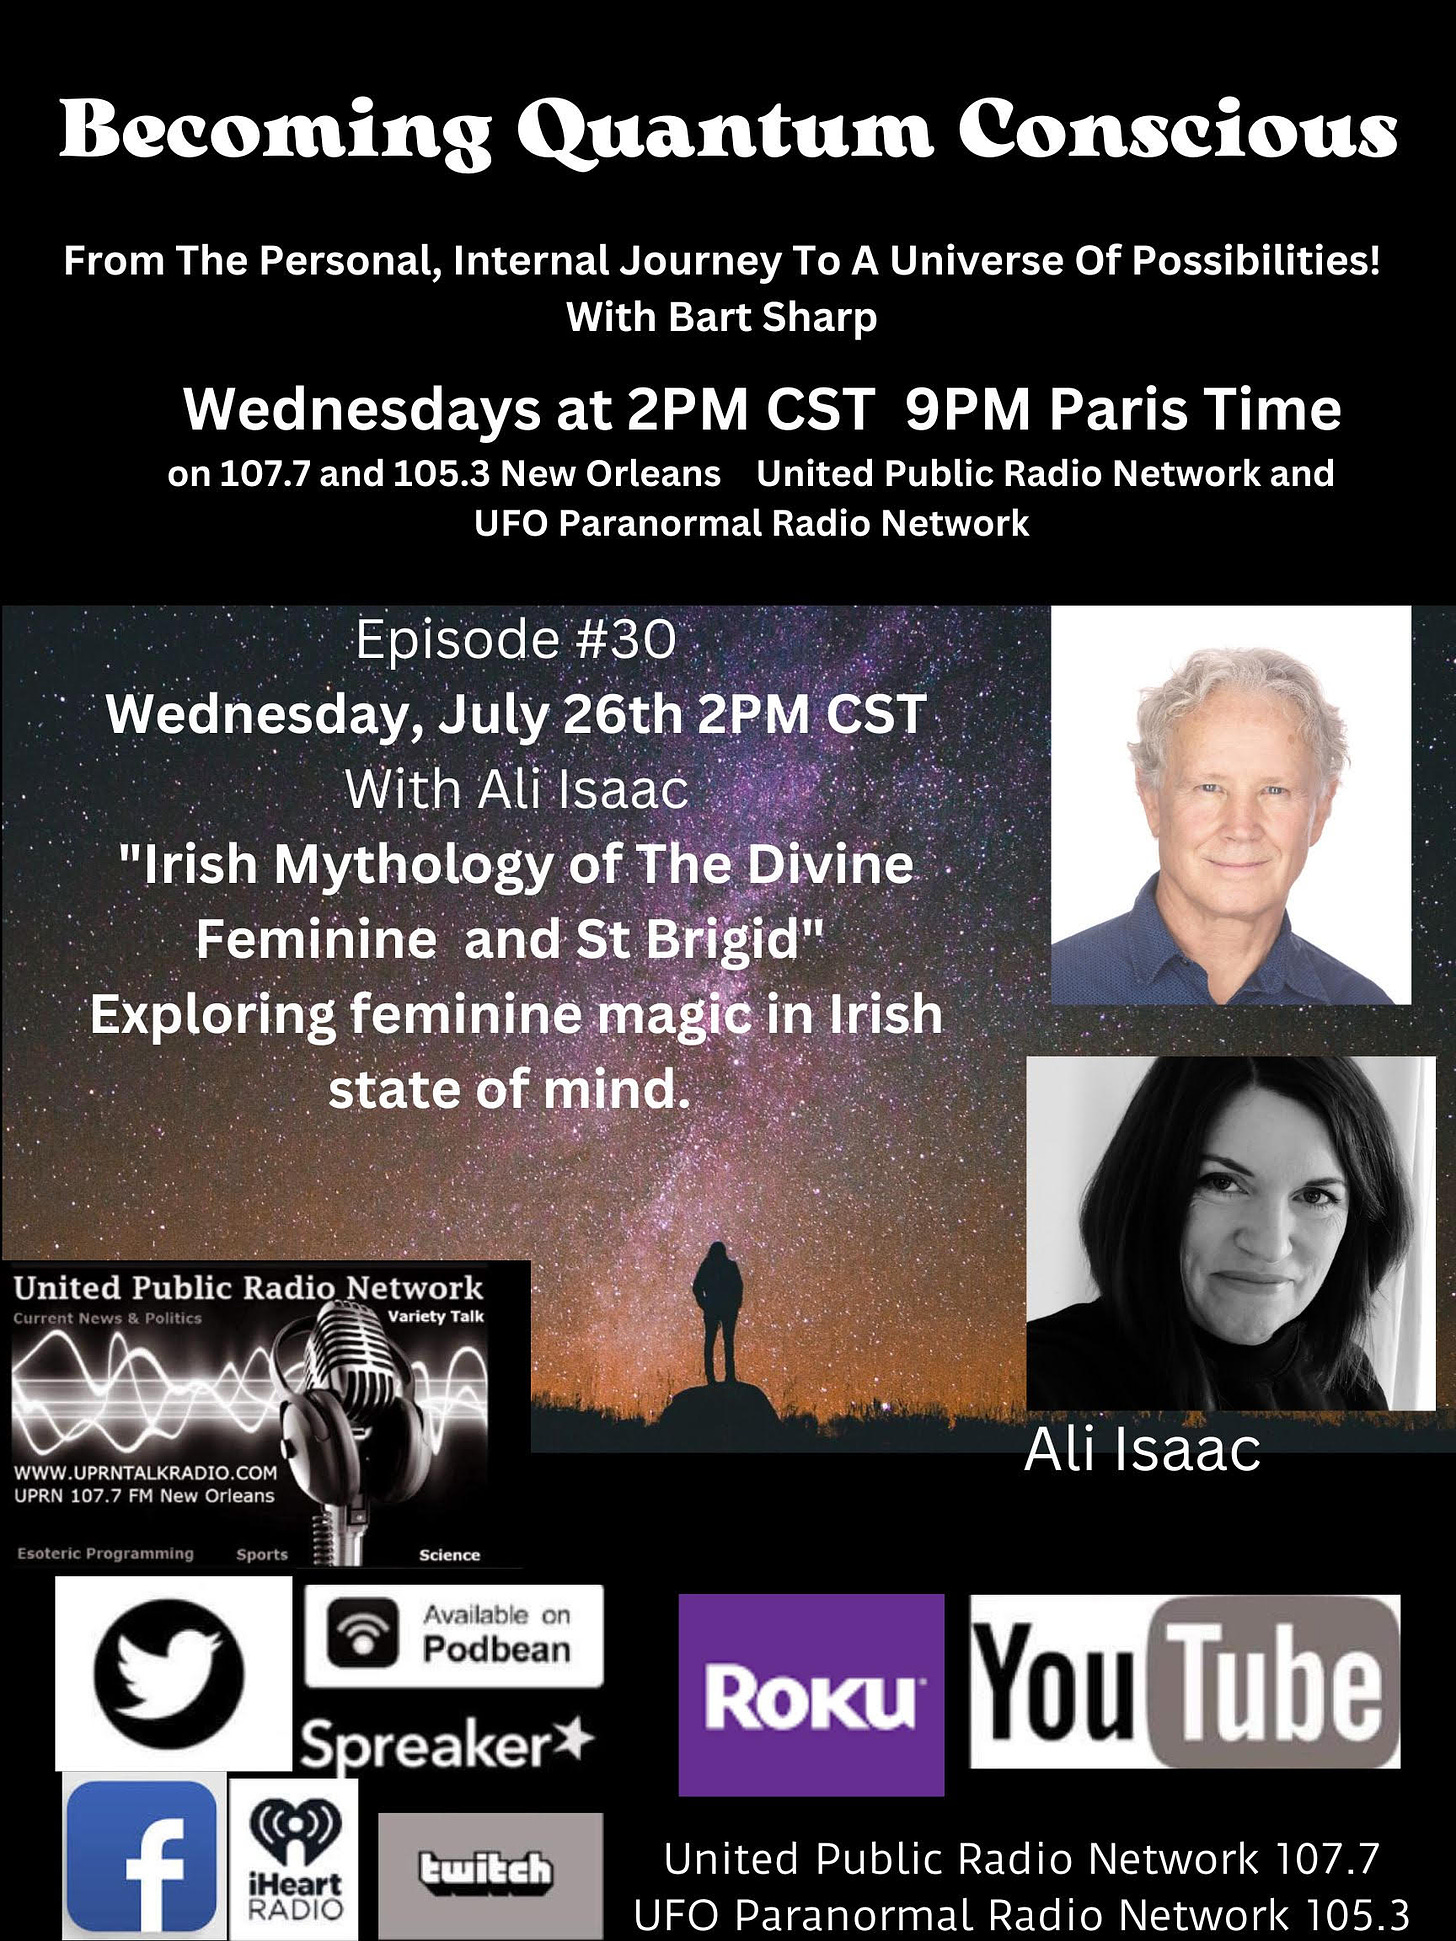 Poster for Bart Sharp's podcast, Becoming Quantam Conscious, with a picture of me and host. Wording: From the personal internal journey to a universe of possibilities 2pm CST 9pm Paris time, eoisode 30 July 26th with Ali Isaac Exploring feminine magic in the Irish state of mind